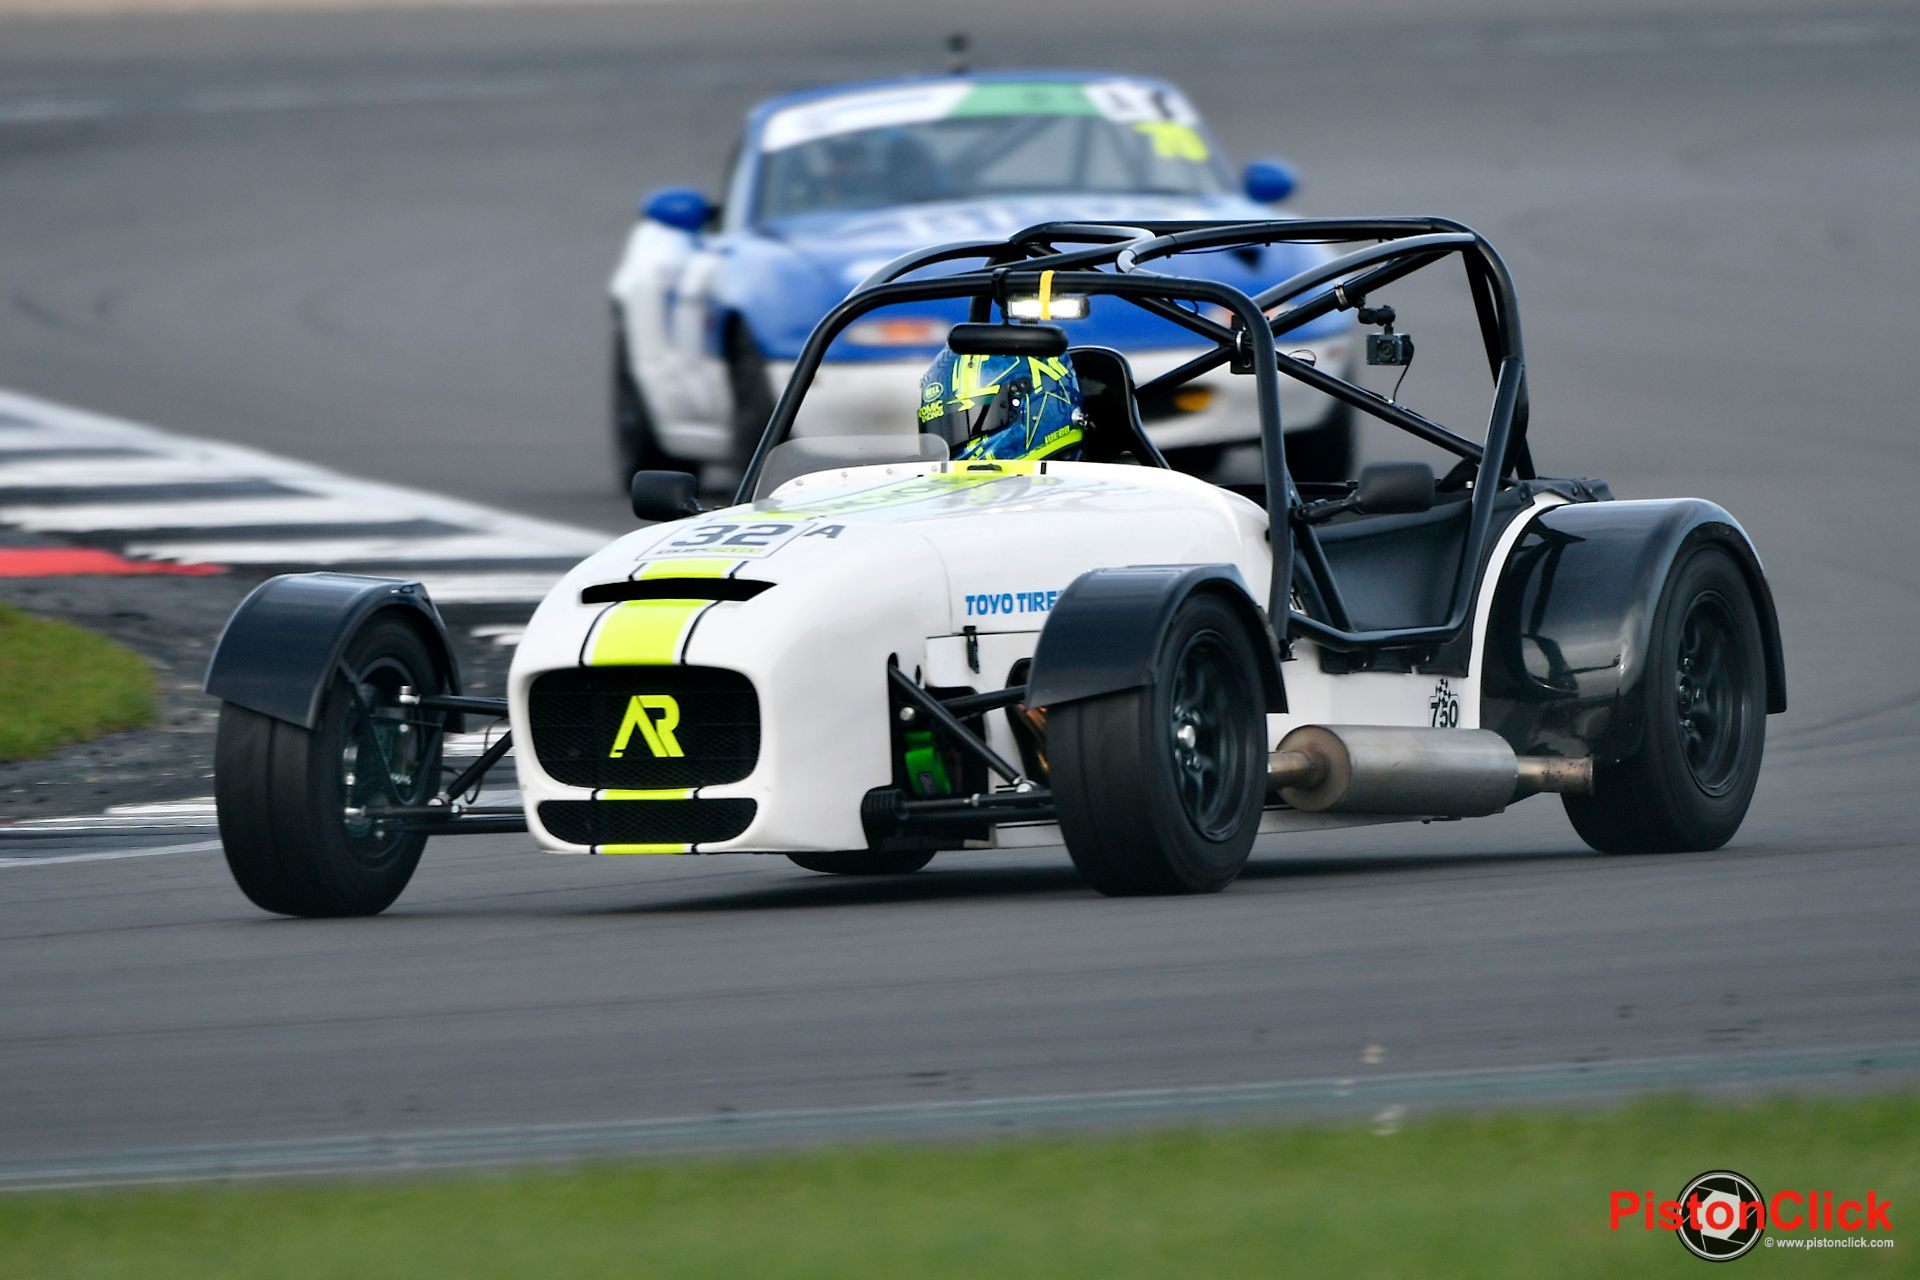 Race cars at the Birkett Relay race at Silverstone